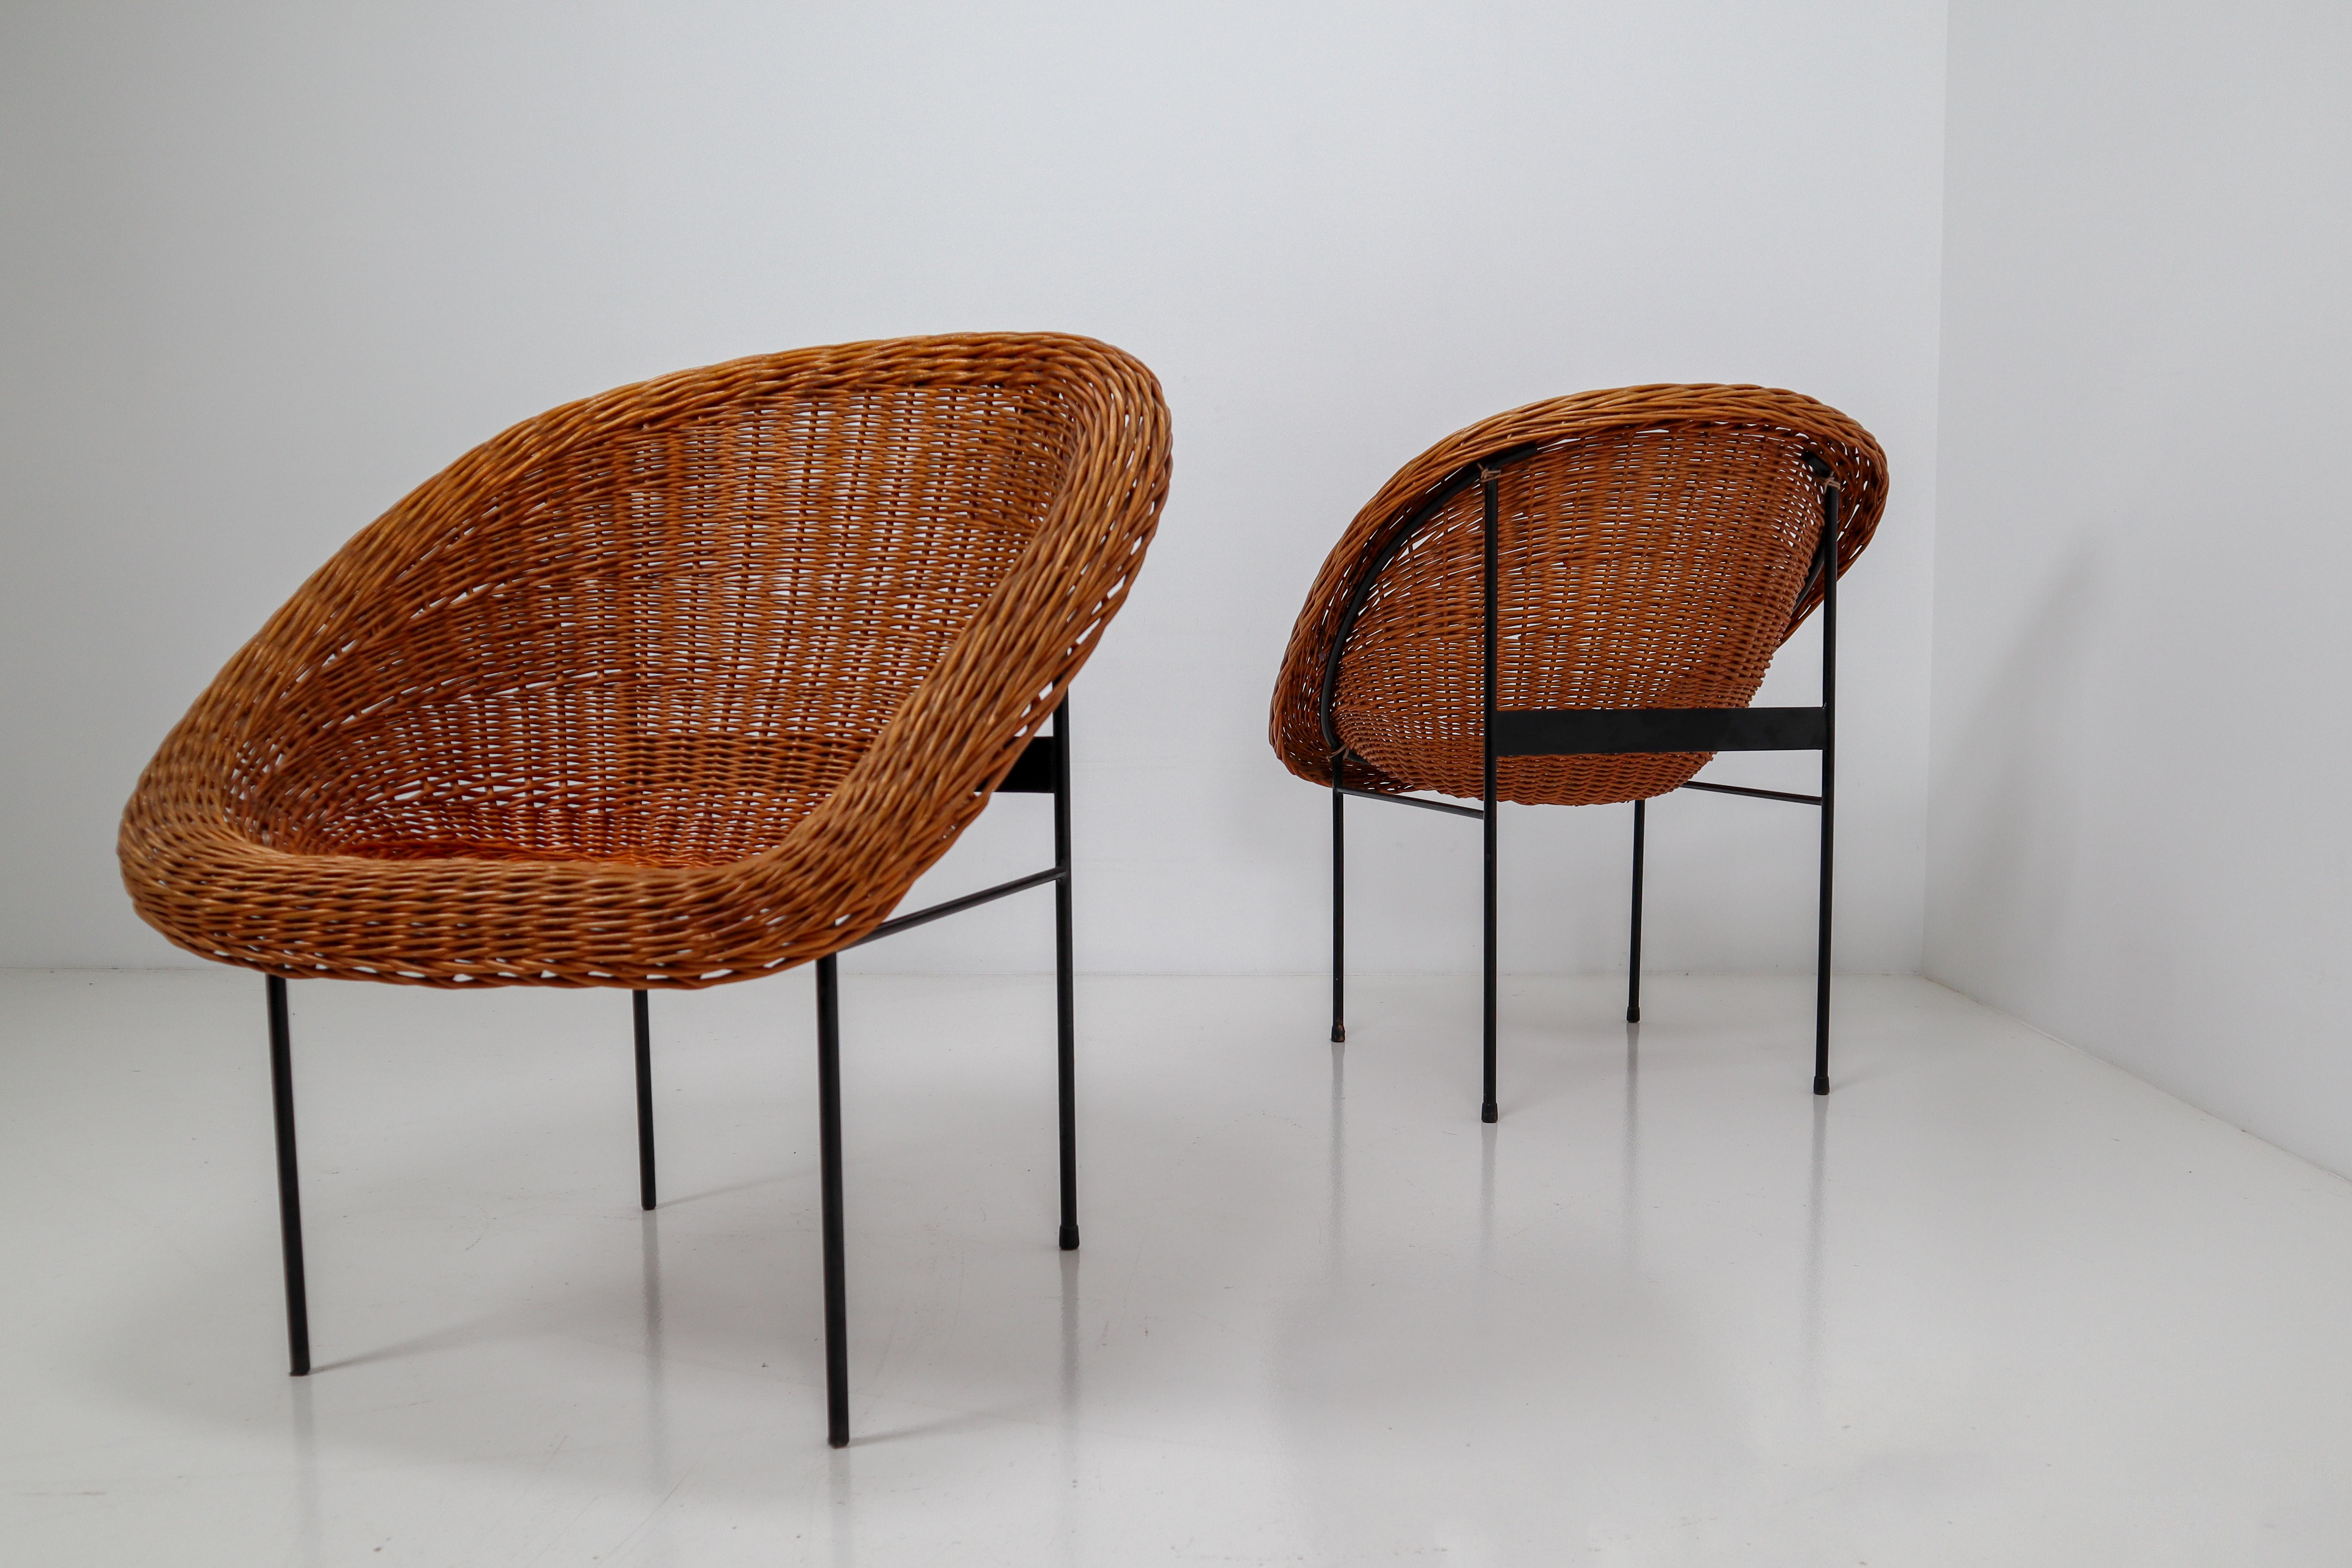 Pair of two wicker midcentury easy chairs designed and produced in France during the 1960s. The chairs are made from handwoven wicker for the seat that is formed into a basket. The frame is made of black lacquered steel. They are comfortable to sit